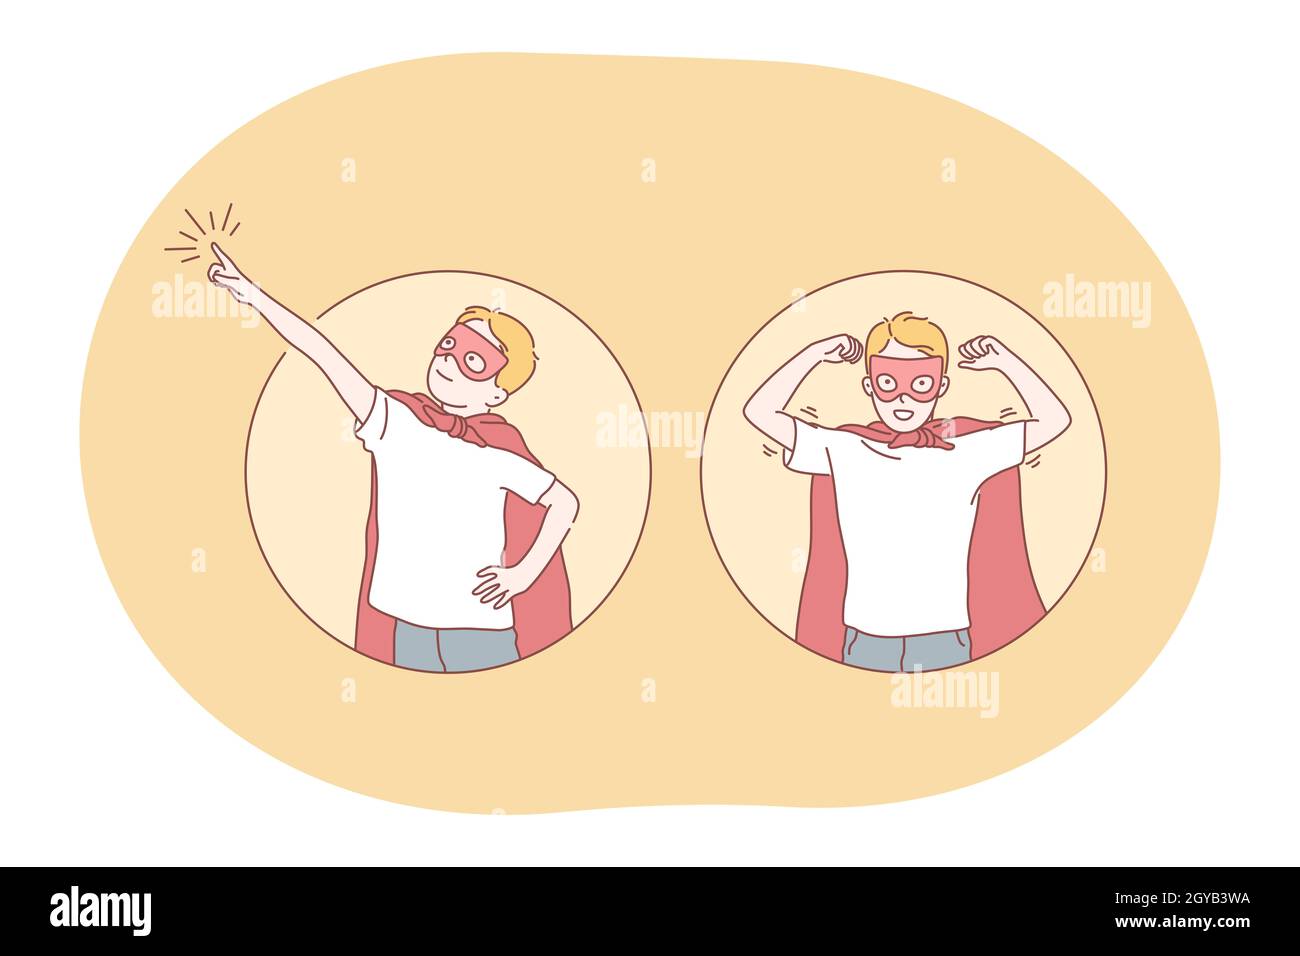 Superhero, superman, power concept. Young smiling boy child in red superman costume mantle and mask imagining superpower and leadership. Fantasy, imag Stock Photo